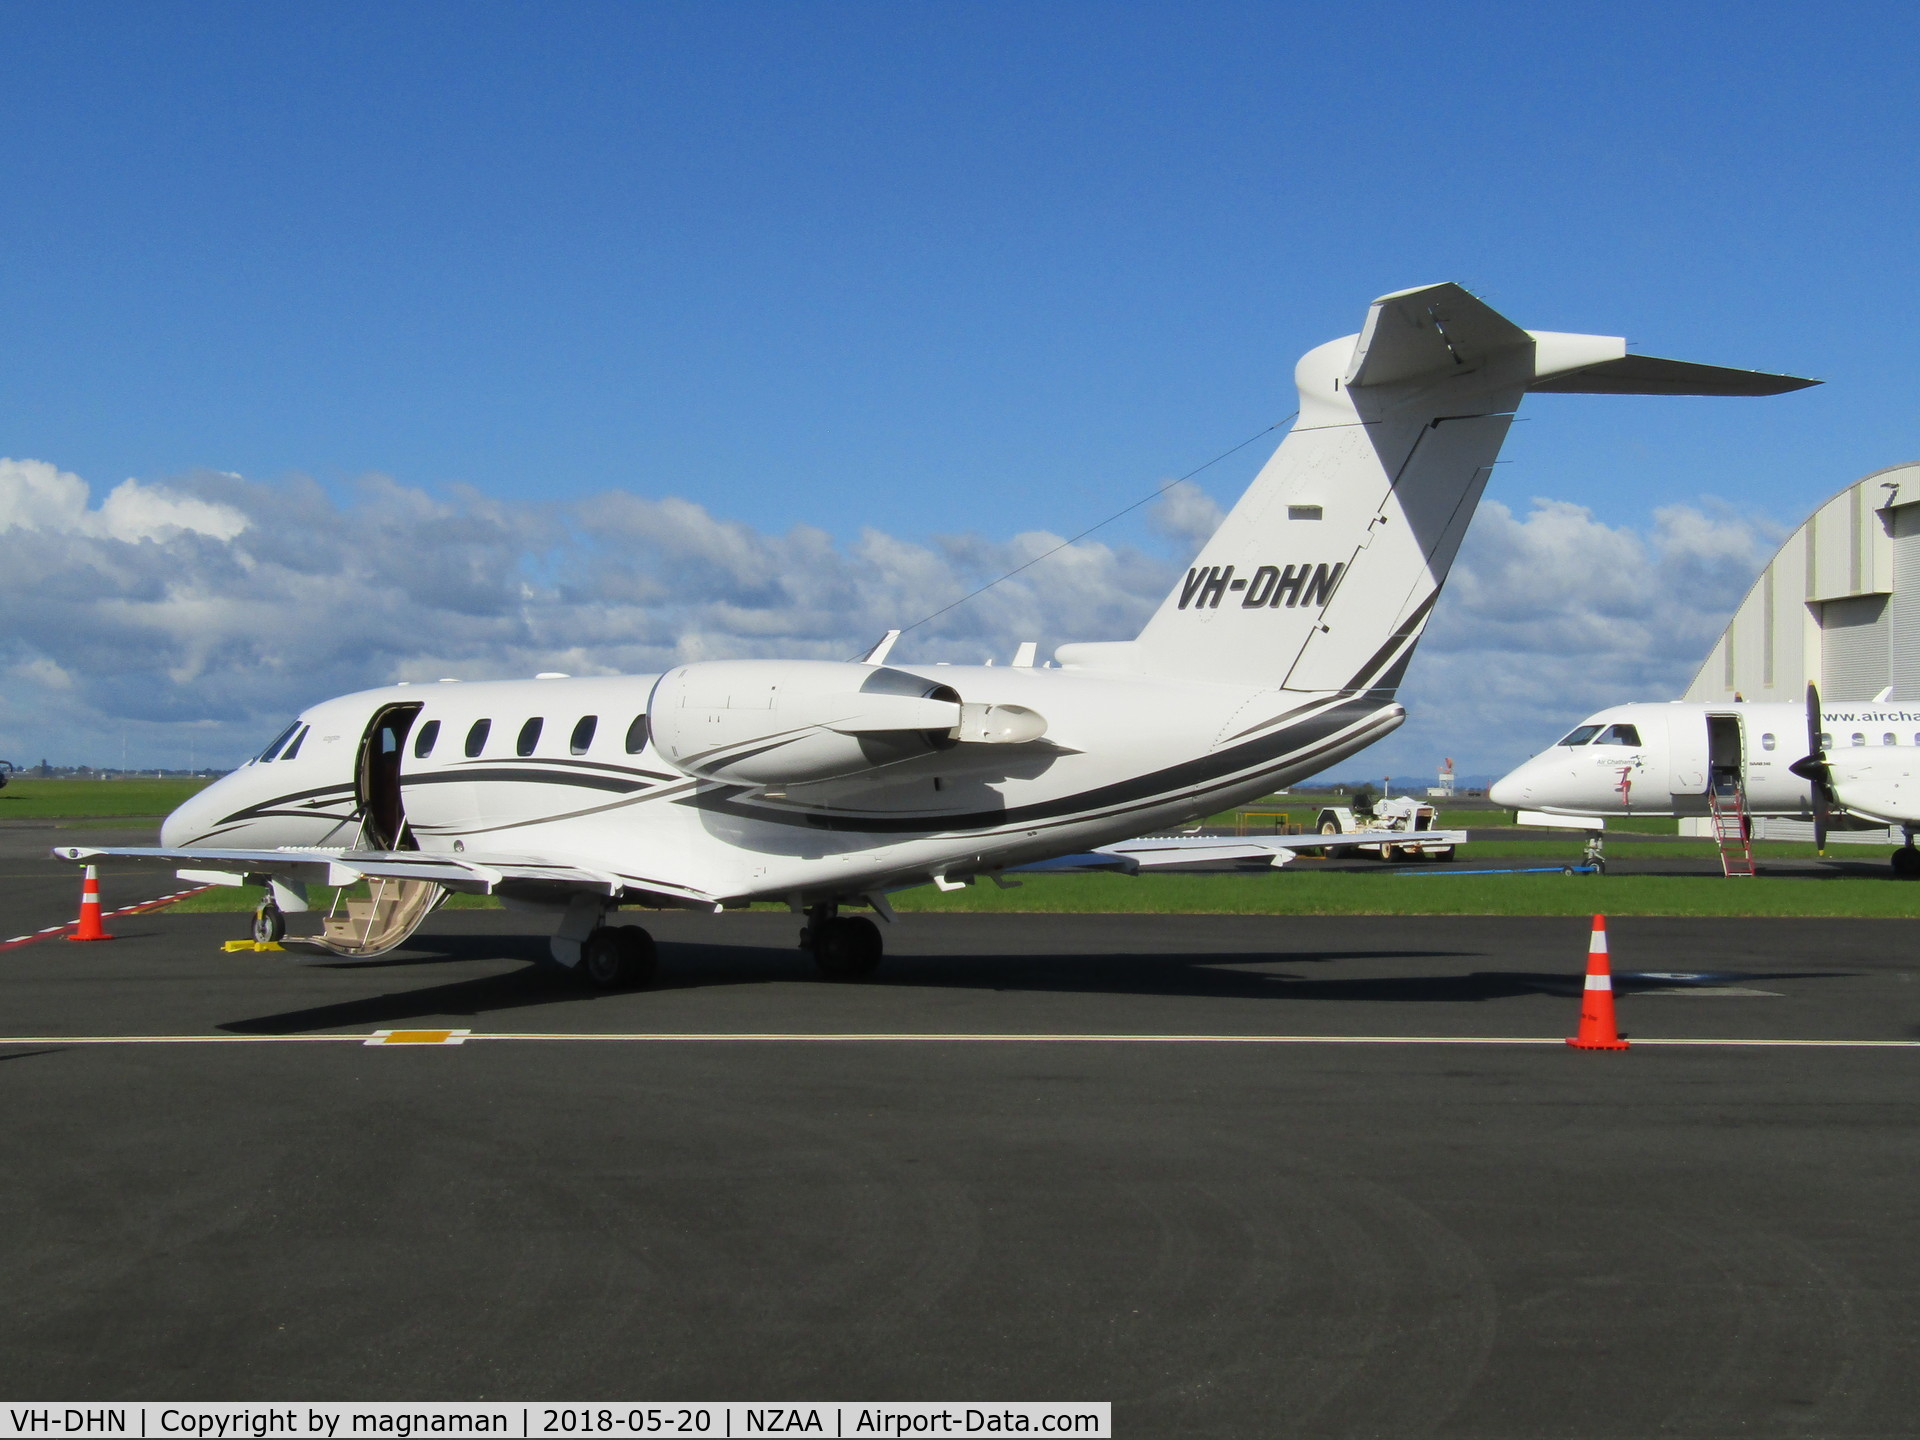 VH-DHN, 1993 Cessna 650 Citation VII C/N 650-7011, GETTING READY TO LEAVE